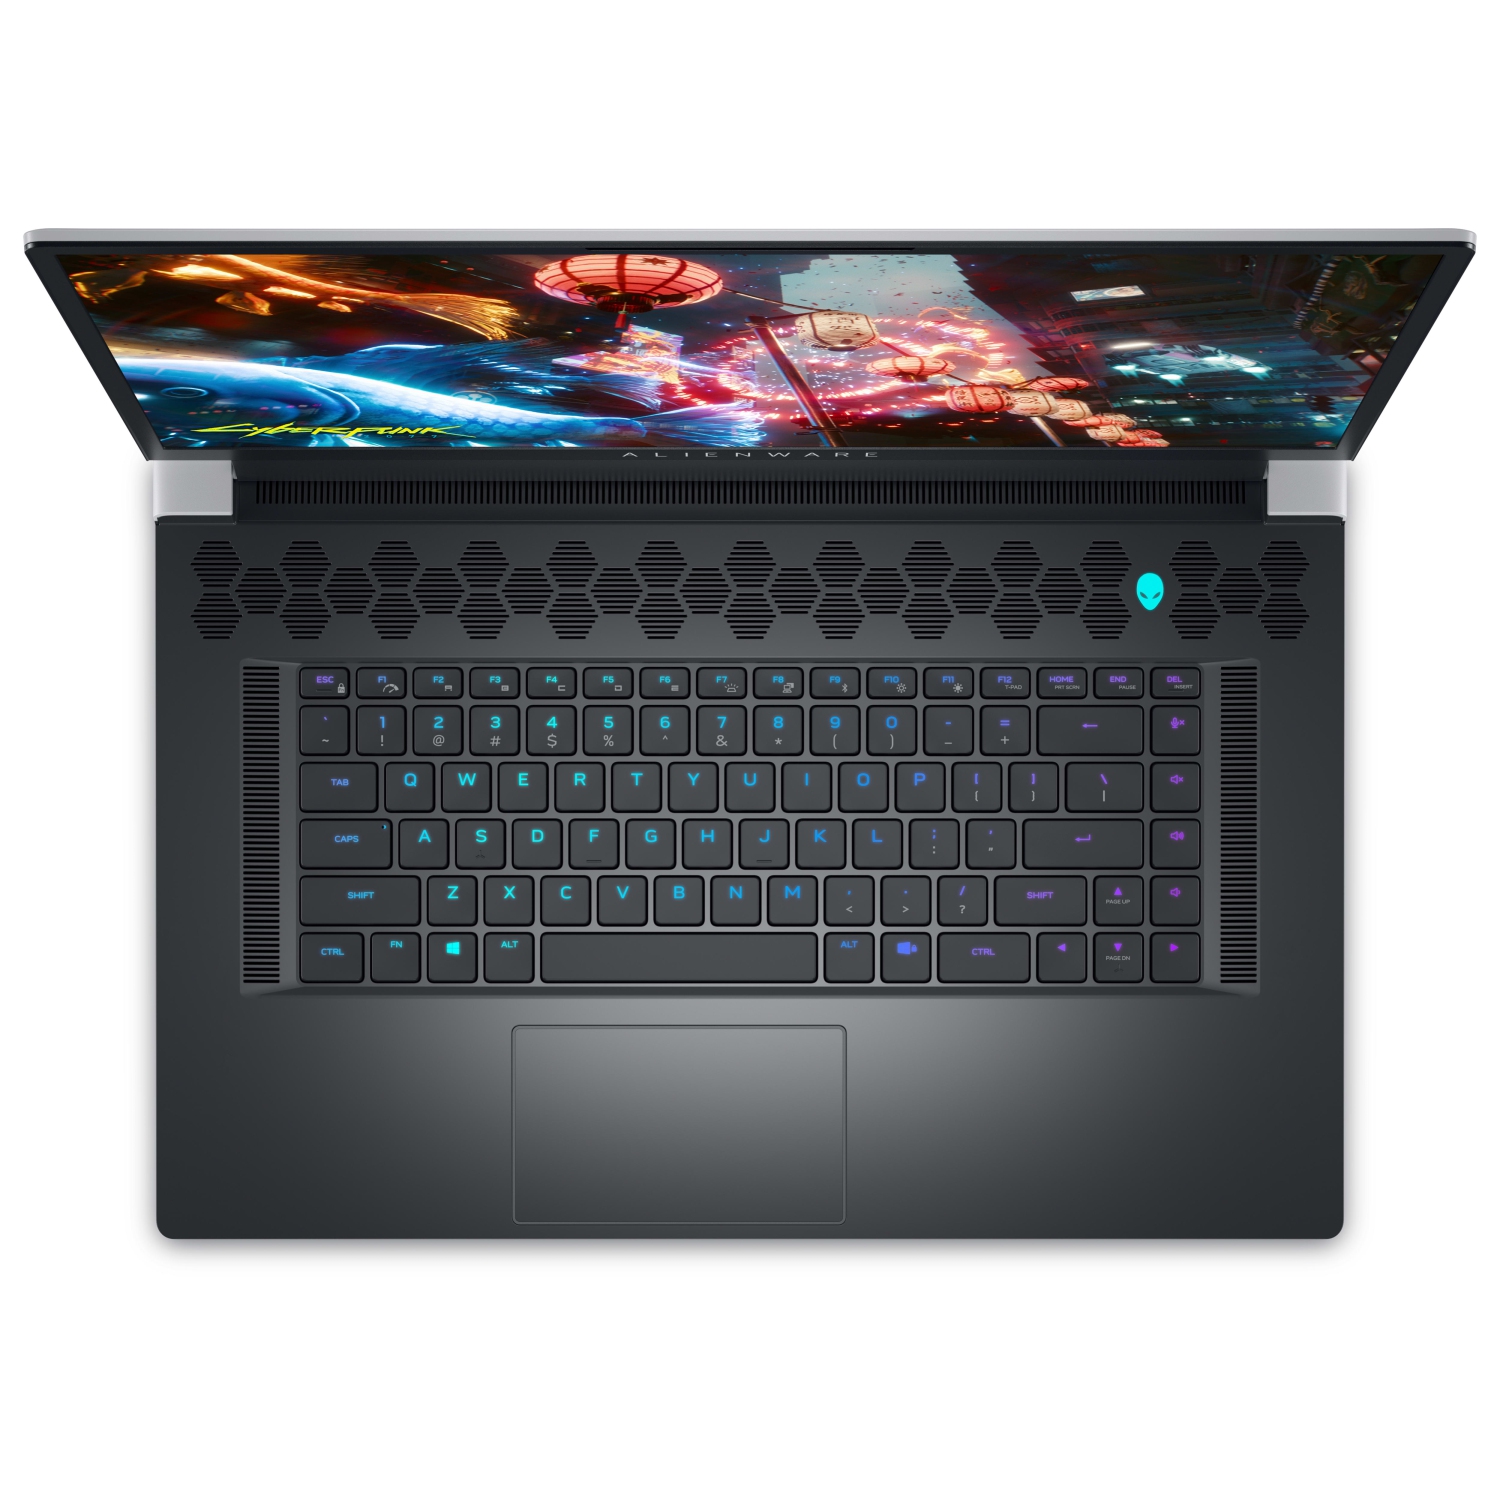 Refurbished (Excellent) – Dell Alienware X17 R2 Gaming Laptop (2022) | 17.3" FHD | Core i9 - 1TB SSD - 64GB RAM - RTX 3080 | 14 Cores @ 5 GHz - 12th Gen CPU - 8GB GDDR6X